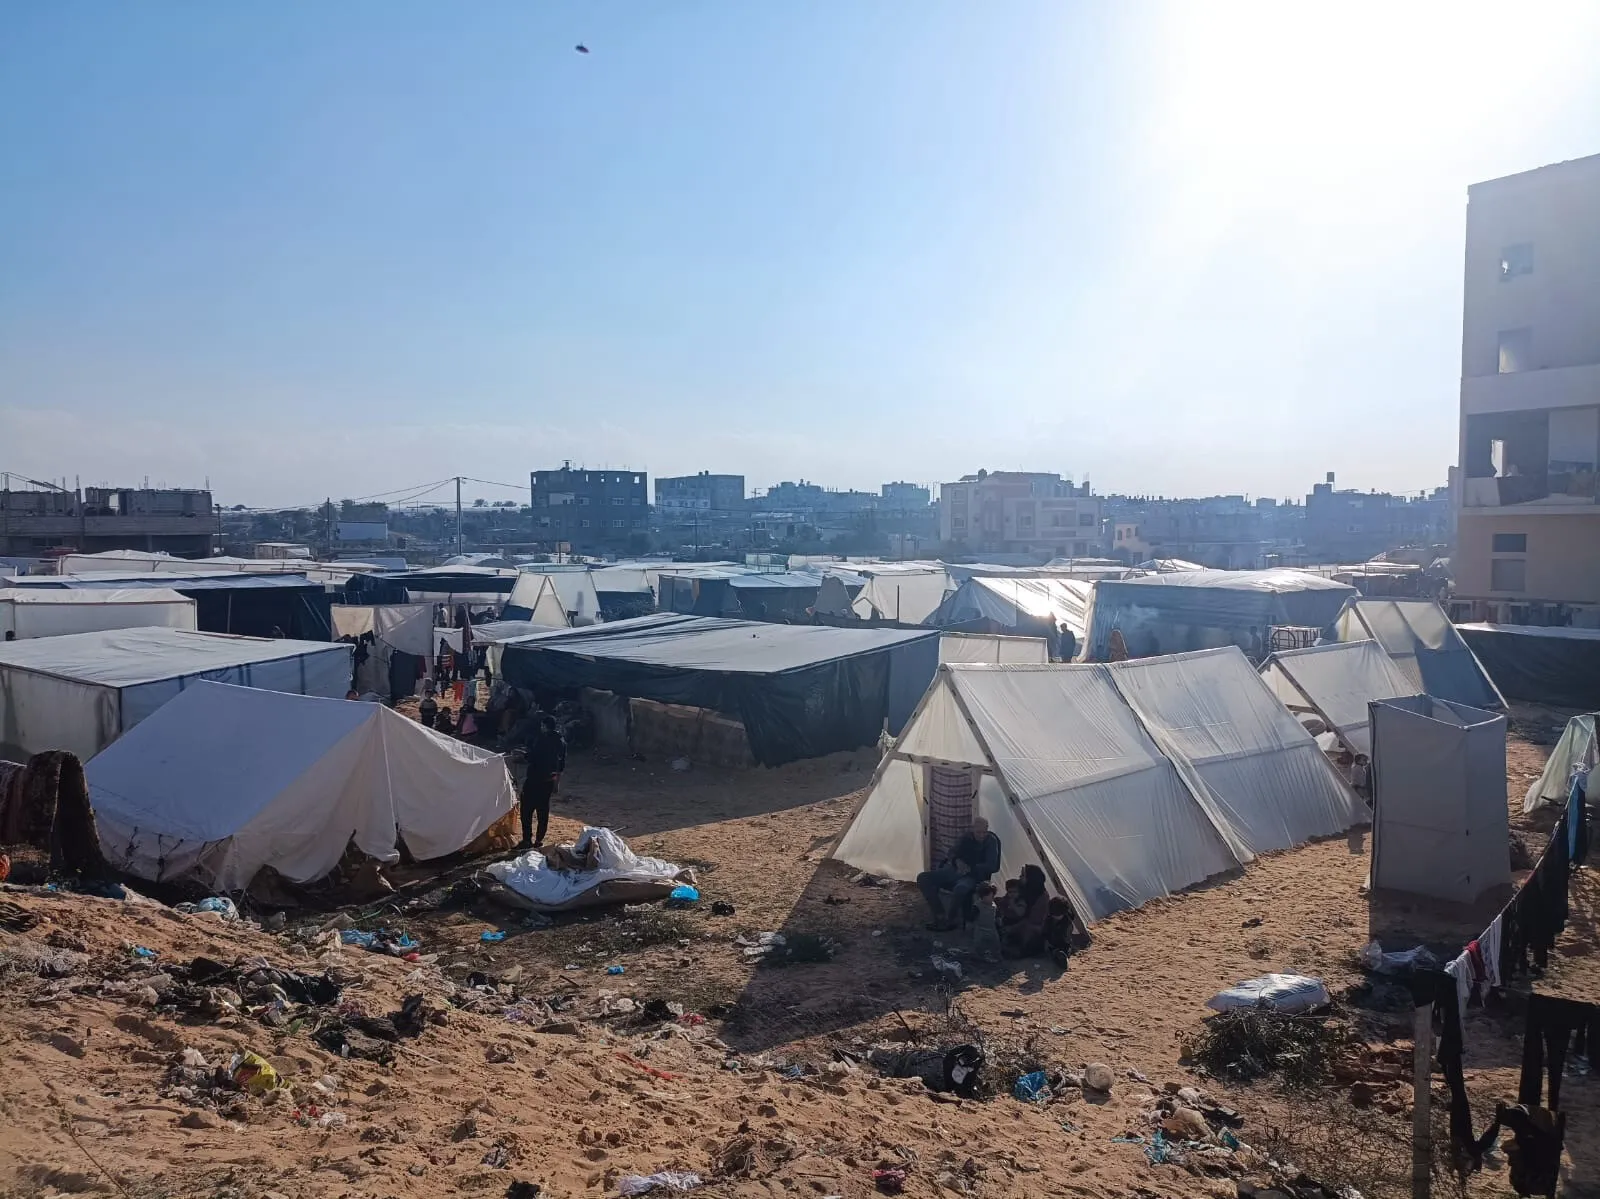 Photo of tents pitched atop dirt in an urban landscape under clear skies